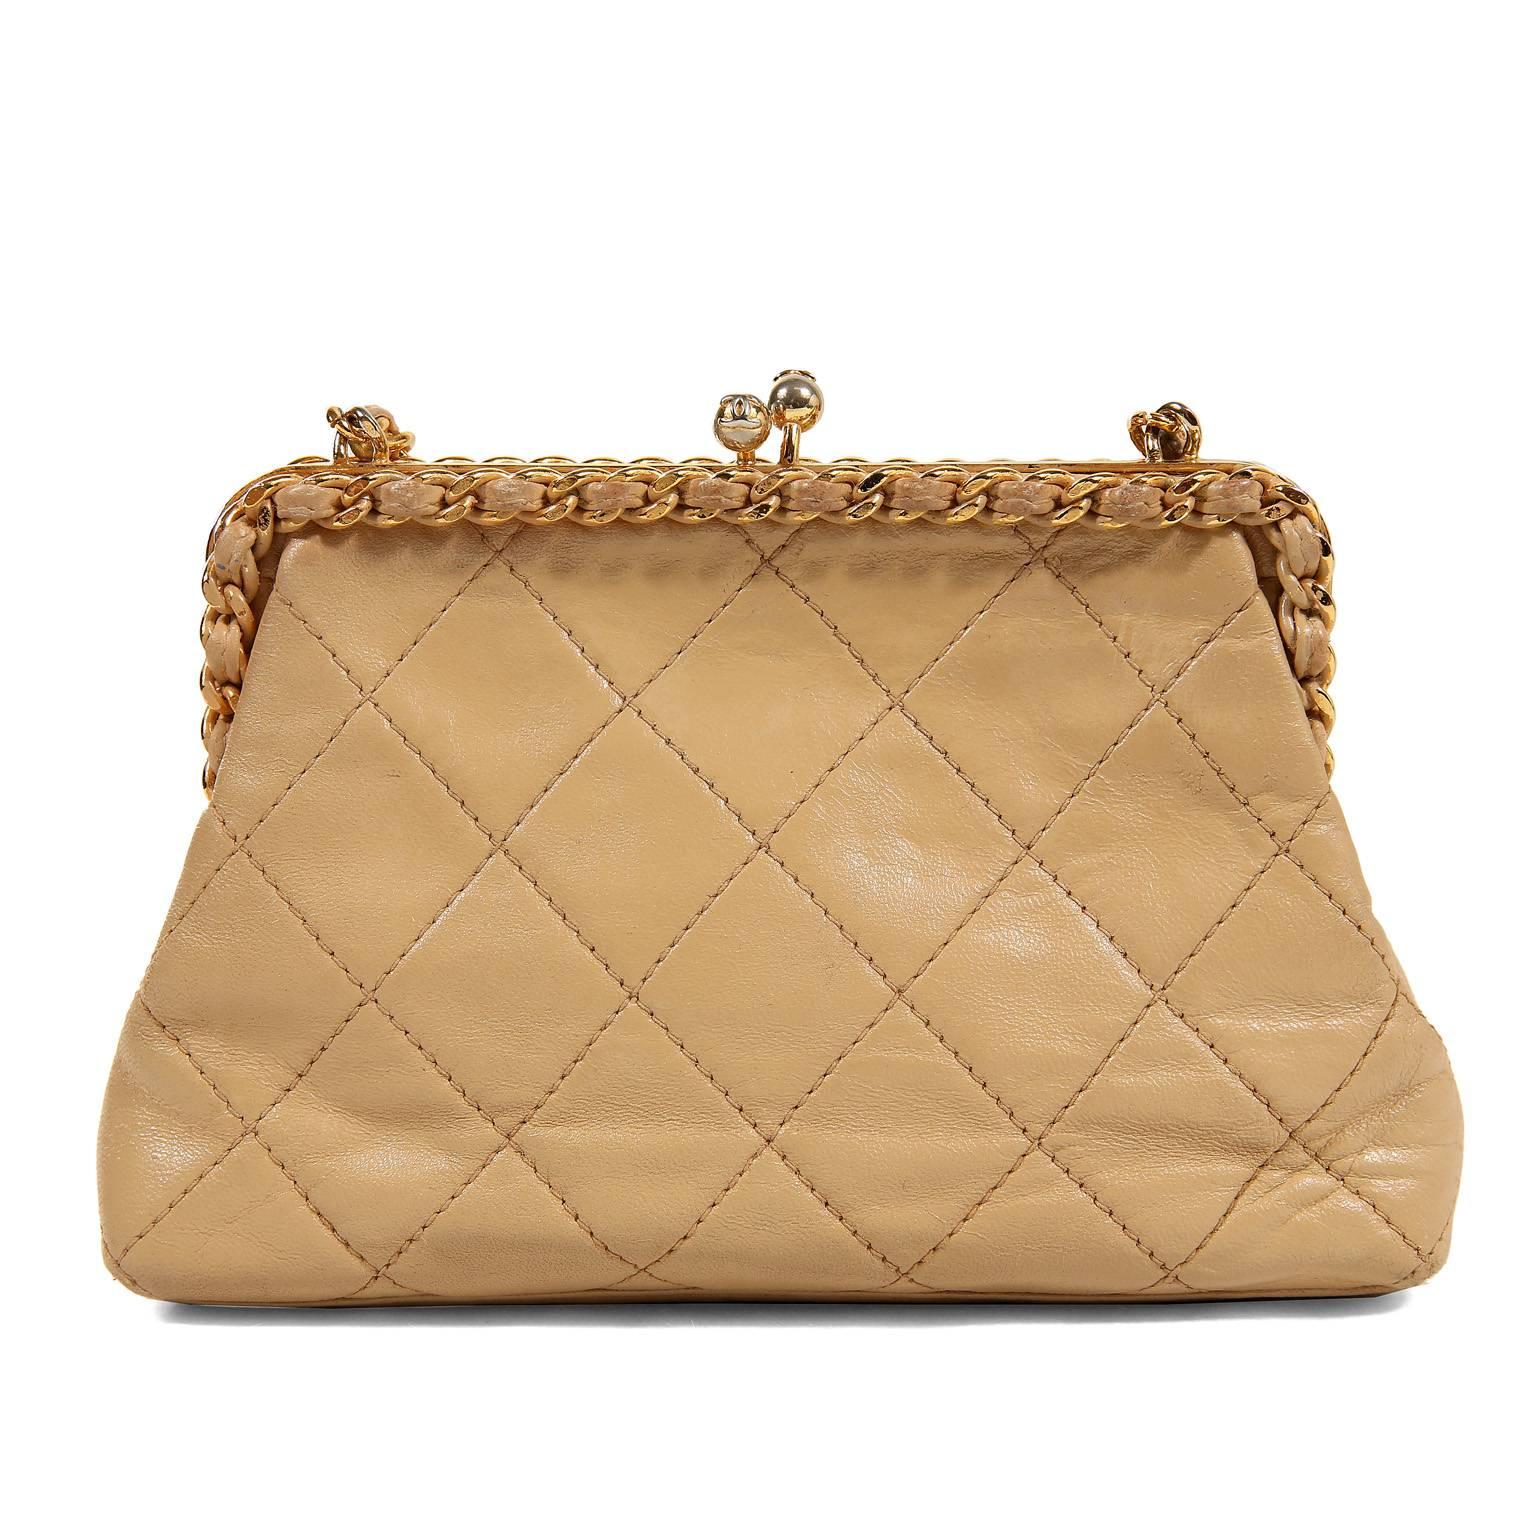 Chanel Beige Leather Kiss Lock Bag- Excellent Vintage Condition
From the early 1990’s, this classic design is a must have for any collection.   
Small framed beige leather bag is quilted in signature Chanel diamond pattern.  A single leather and